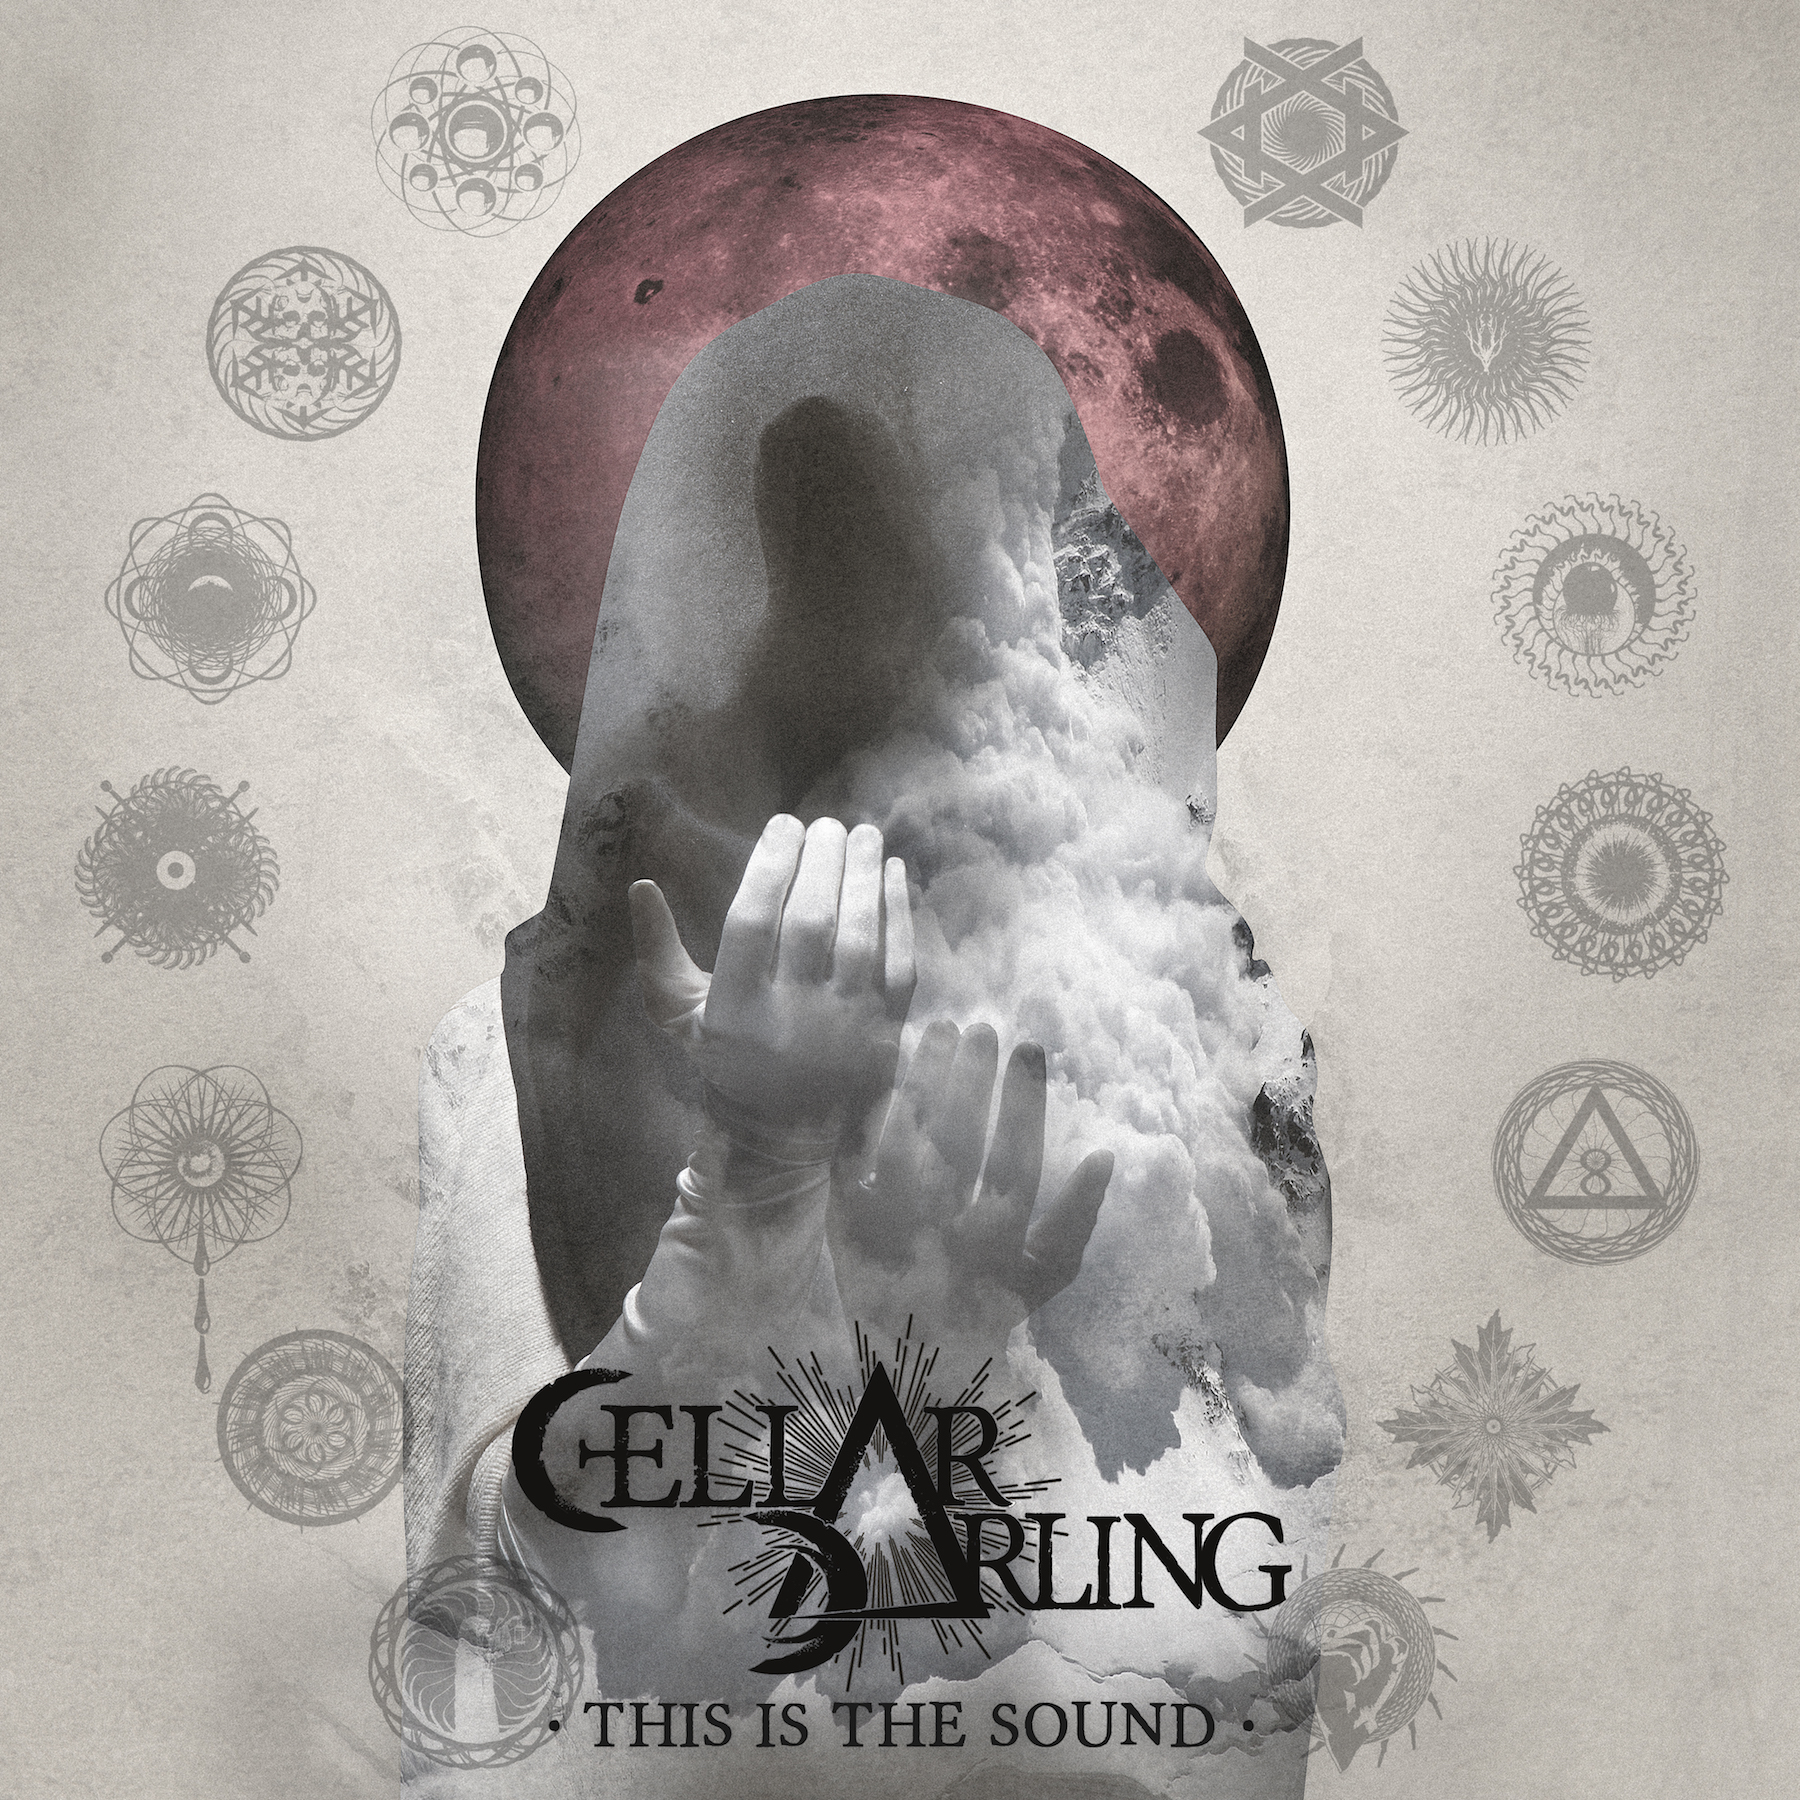 Cellar-Darling-This-Is-The-Sound